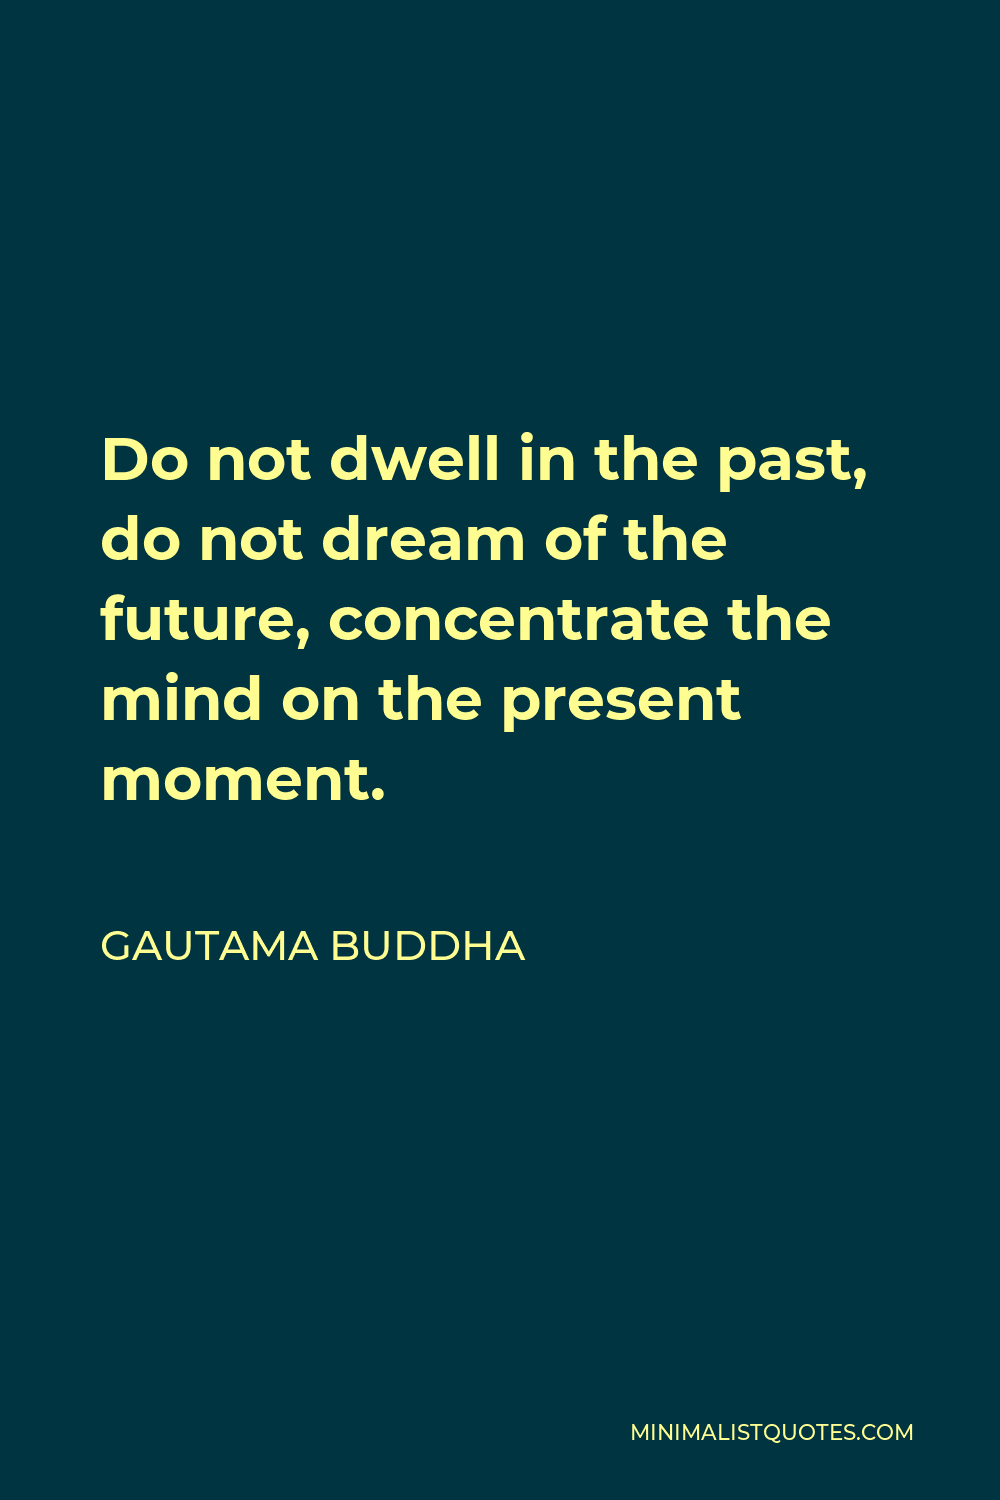 Gautama Buddha Quote: Do not dwell in the past, do not dream of the ...